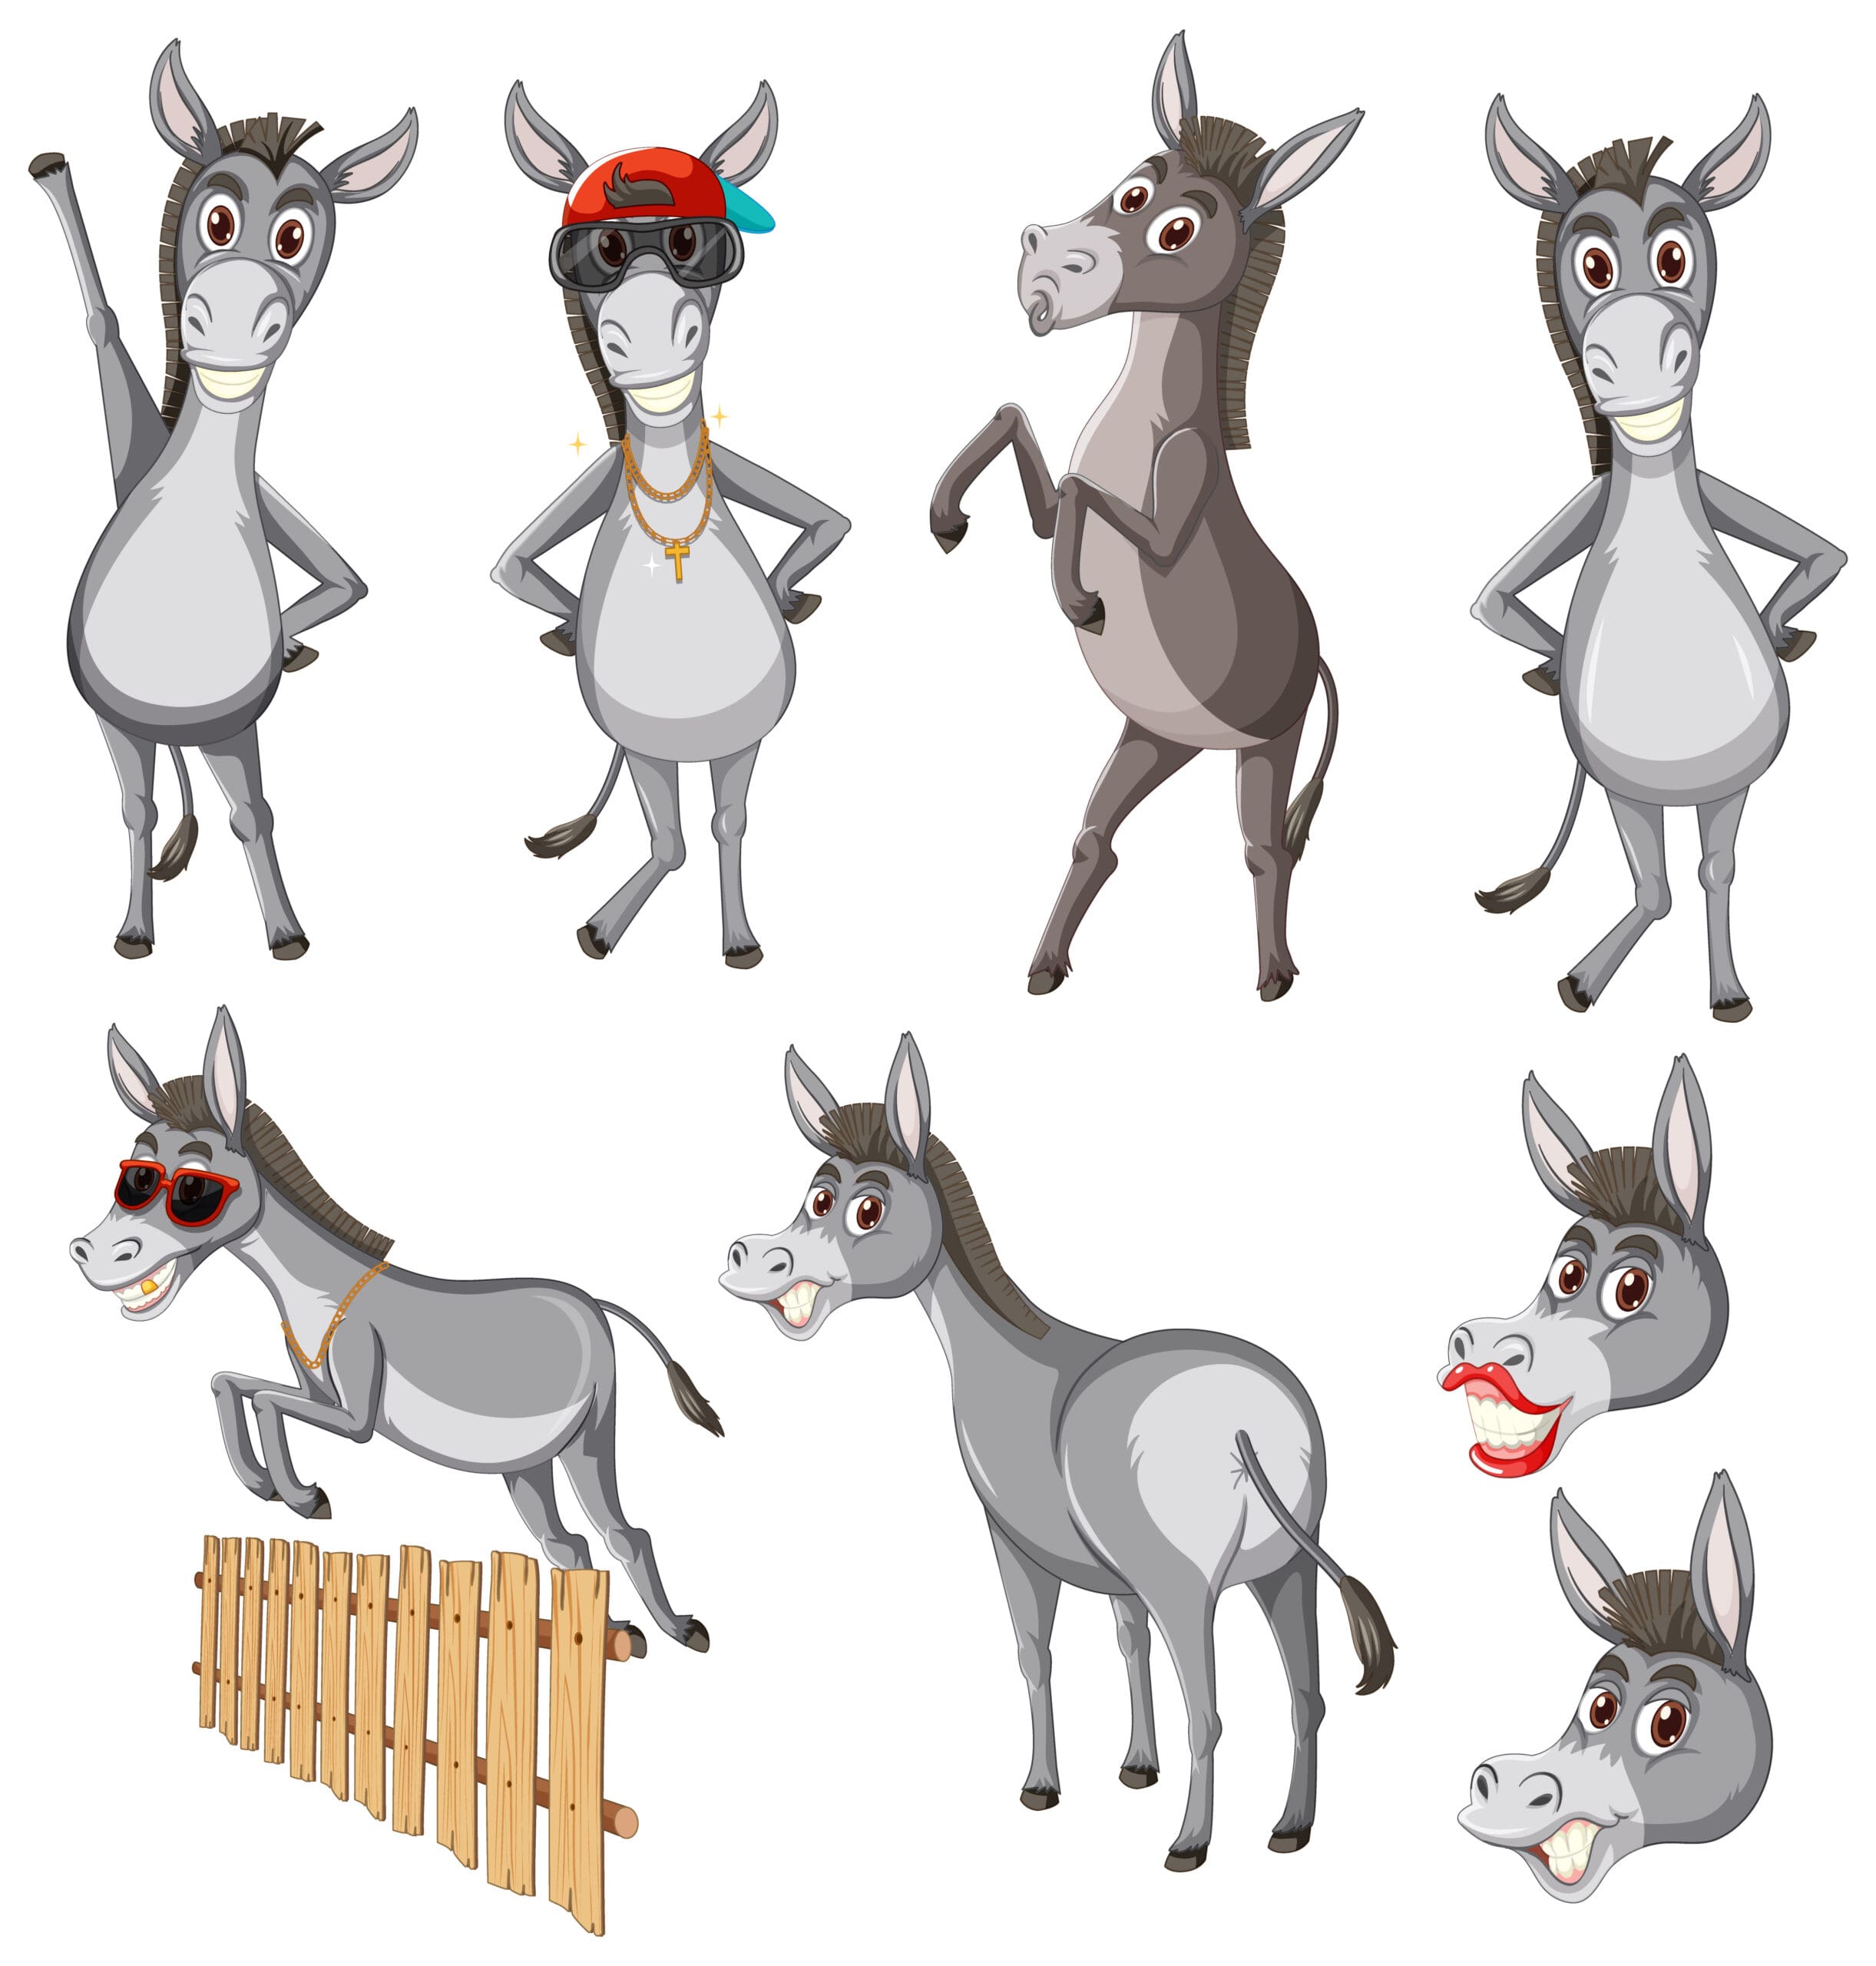 Cartoon graphic of a cheerful donkey with its ears perked u